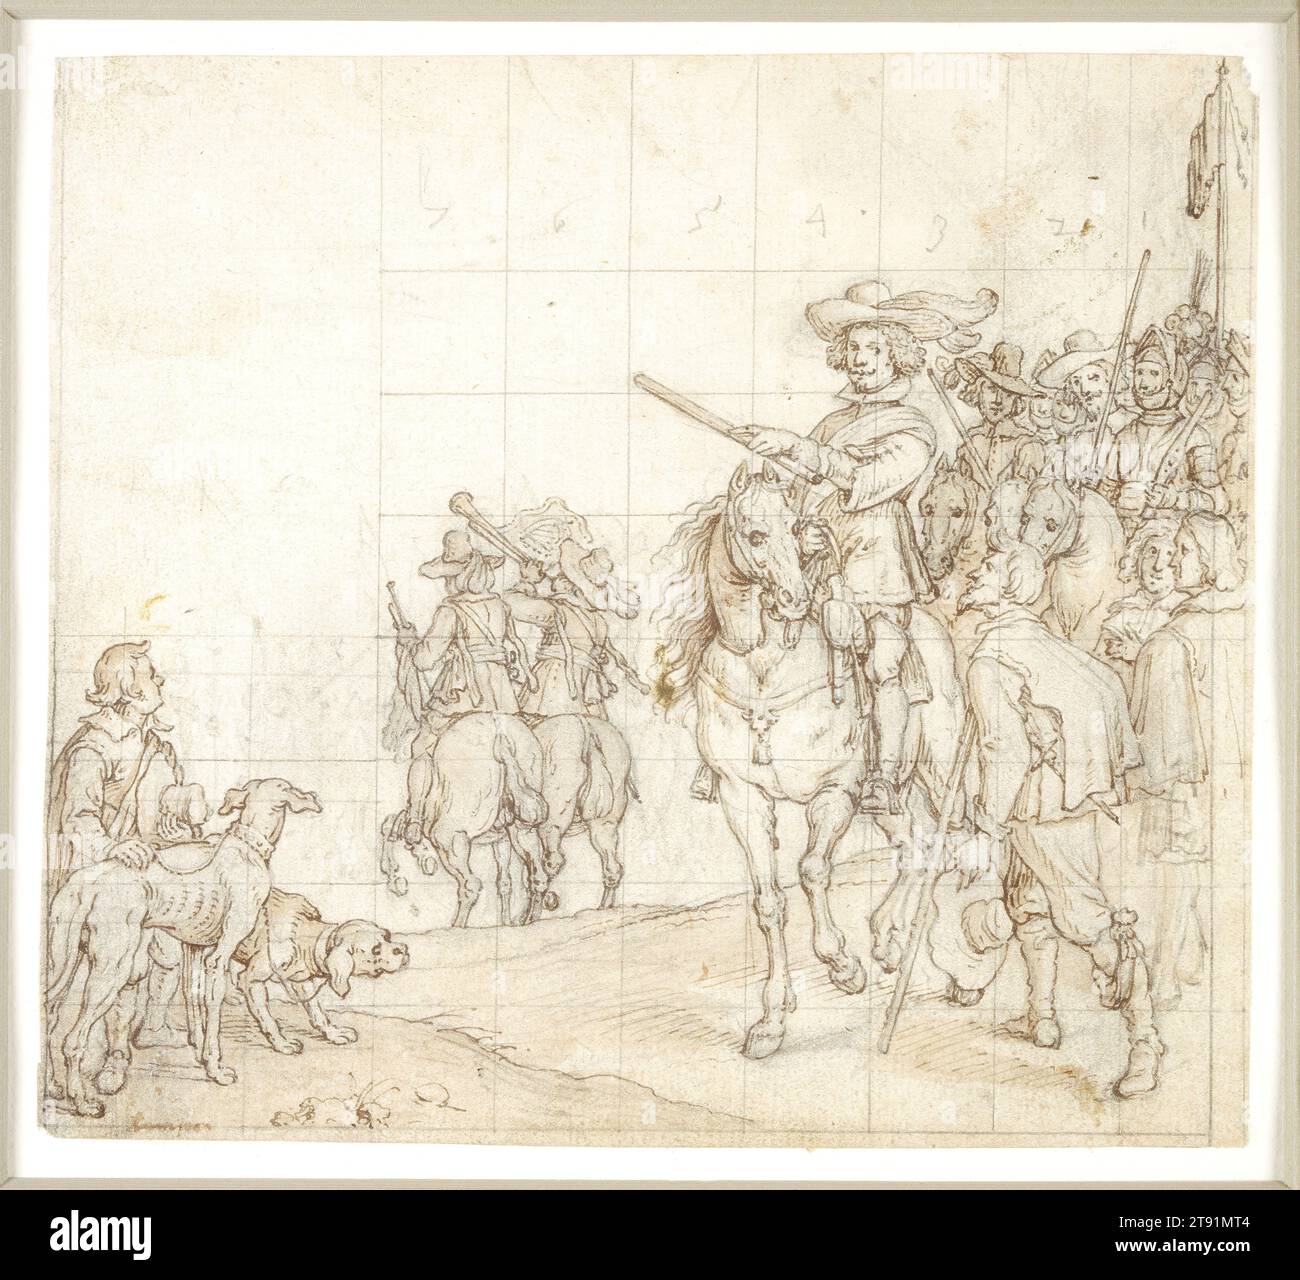 Mounted Officer, 1610s-1630s, Unknown Flemish, 17th century, 6 5/8 x 7 5/16 in. (16.83 x 18.57 cm), Pen and brown ink and wash, over black chalk, Netherlands, 17th century, This drawing may be related to the important series of battle pictures commissioned by Philip IV to decorate the Hall of Realms in his palace of the Buen Retiro in Madrid in the 1630s. The twelve pictures recount triumphs of the Spanish military throughout Europe and the New World, with the preeminent Spanish artists of the period contributing works, including Velasquez (1599-1660). Stock Photo